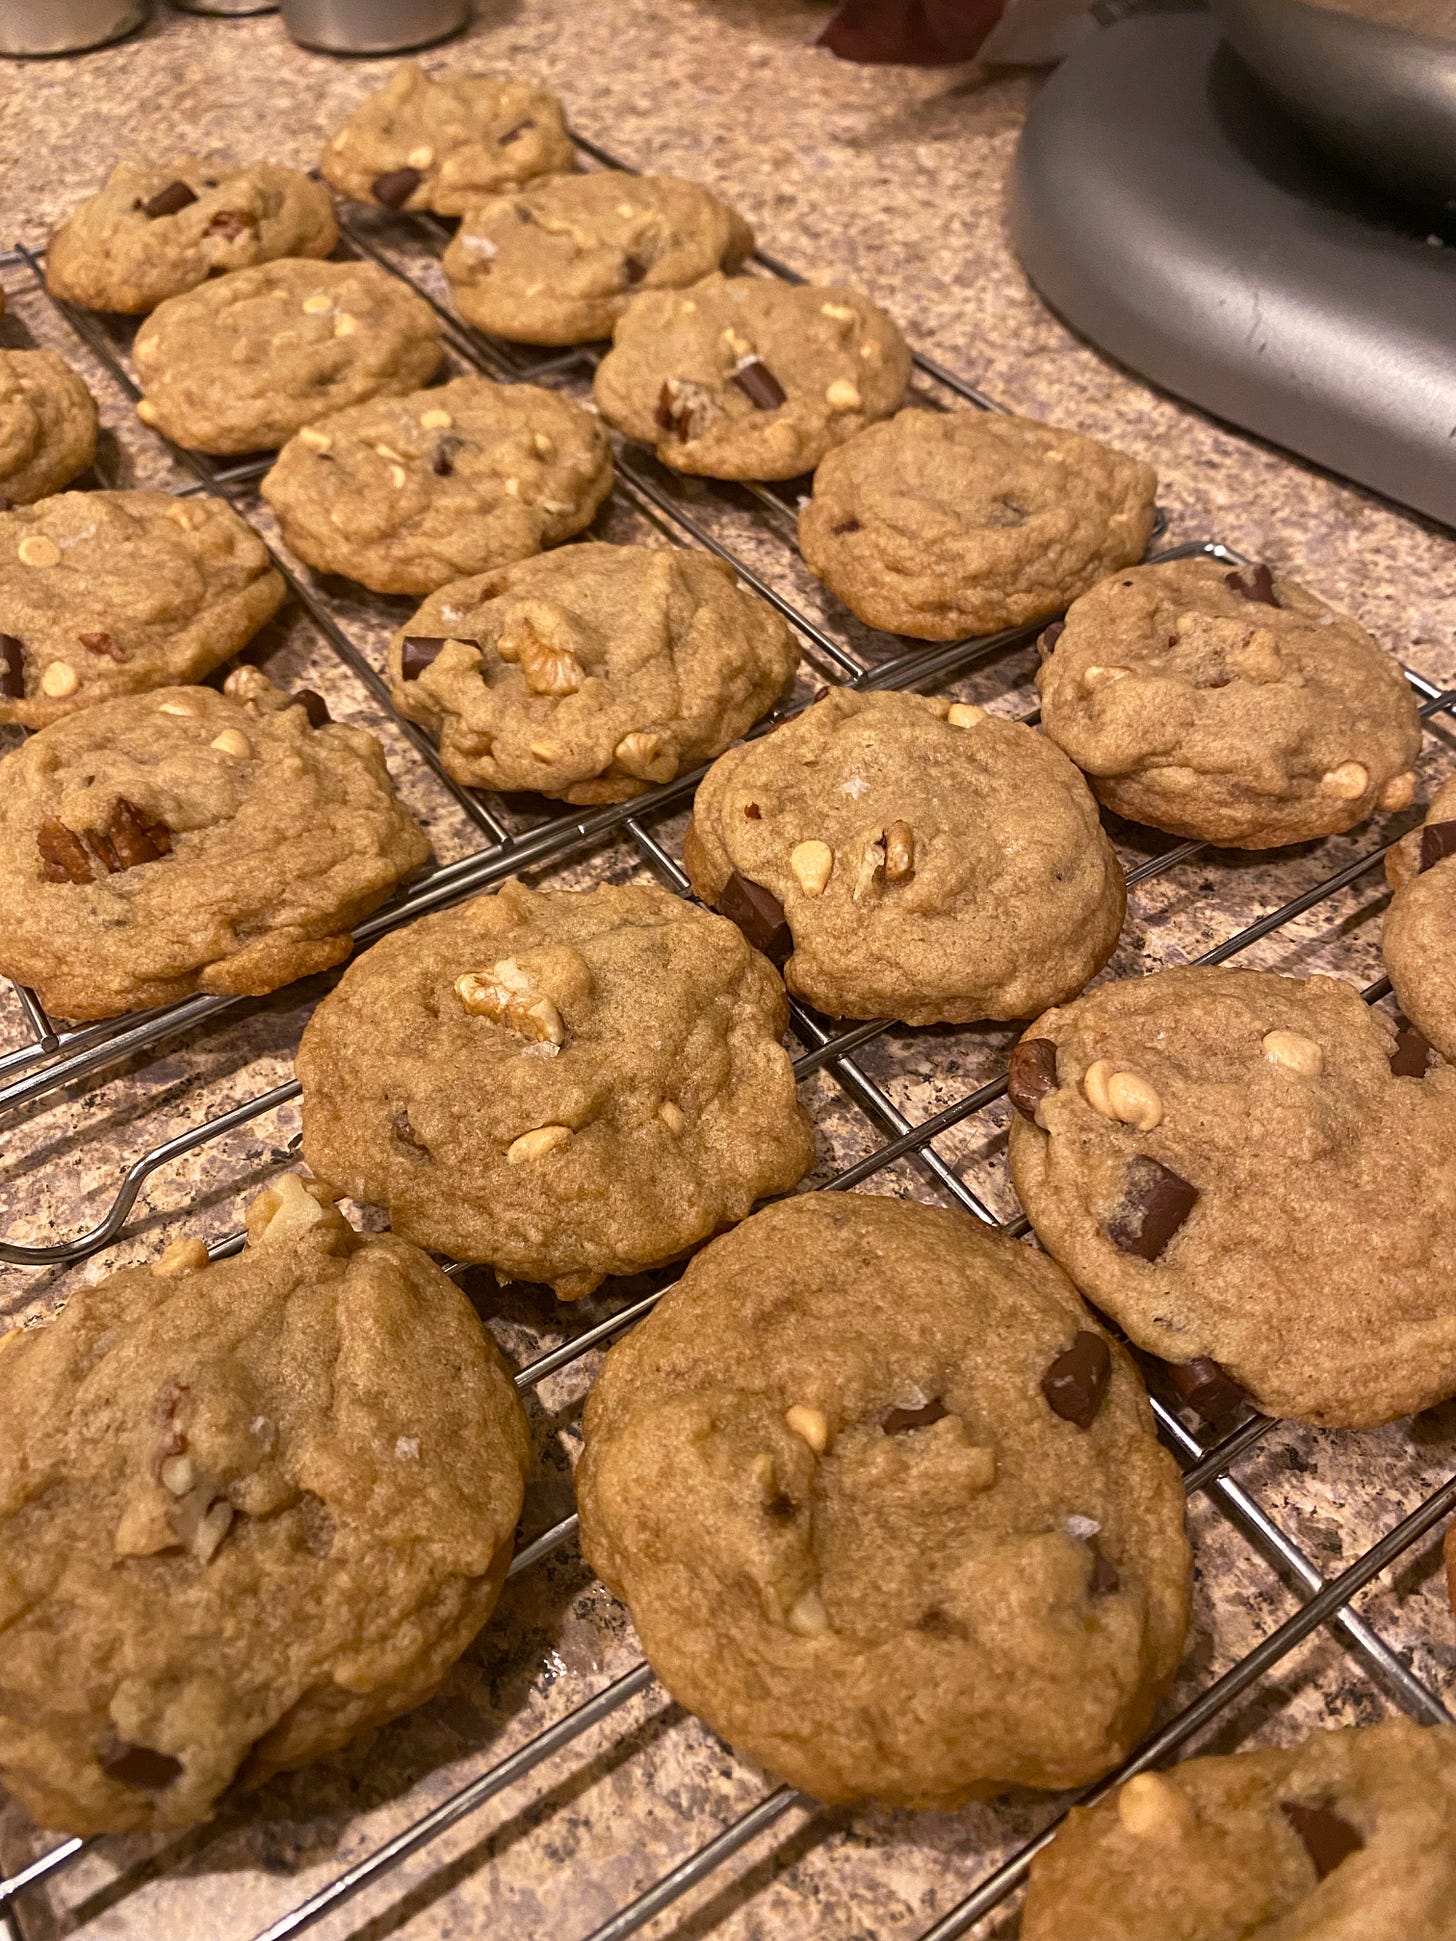 On a cooling rack, a batch of chocolate chunk cookies with nuts and peanut butter chips. Flakes of salt are visible on some of them.